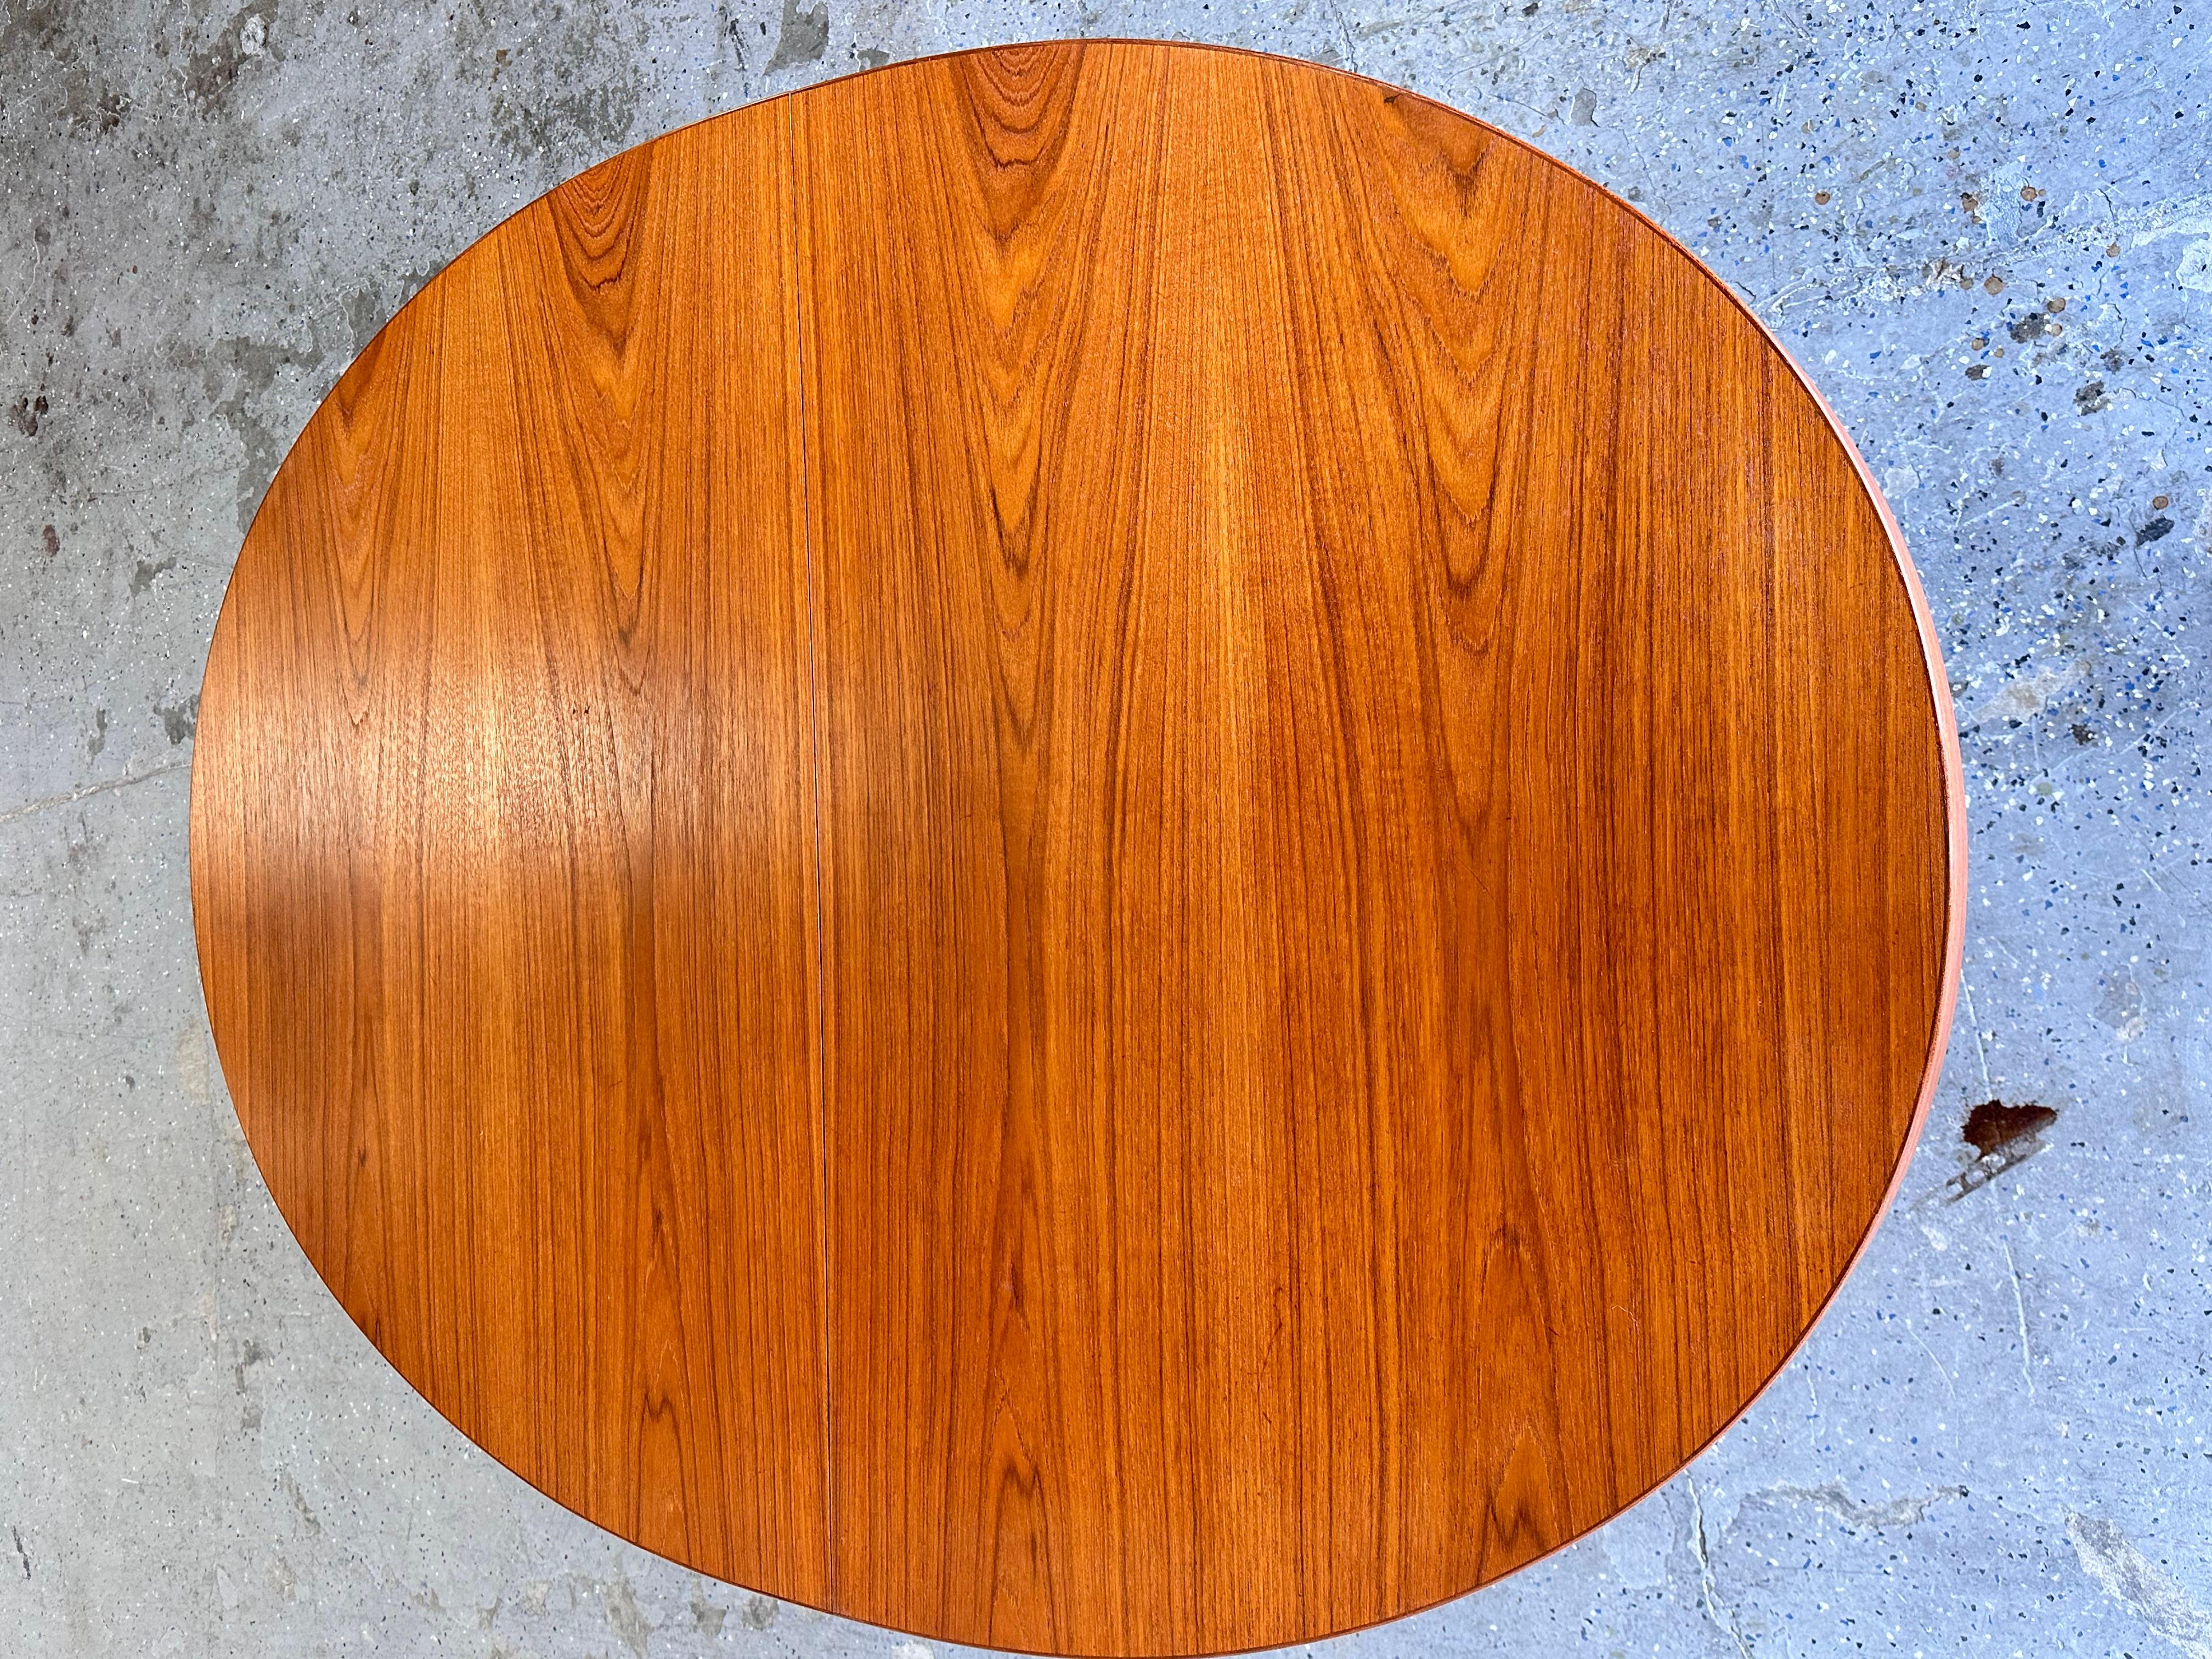 11.5 ft Teak Mid Century Danish Modern Harry Ostergaard Dining table seats 12 In Good Condition For Sale In Las Vegas, NV